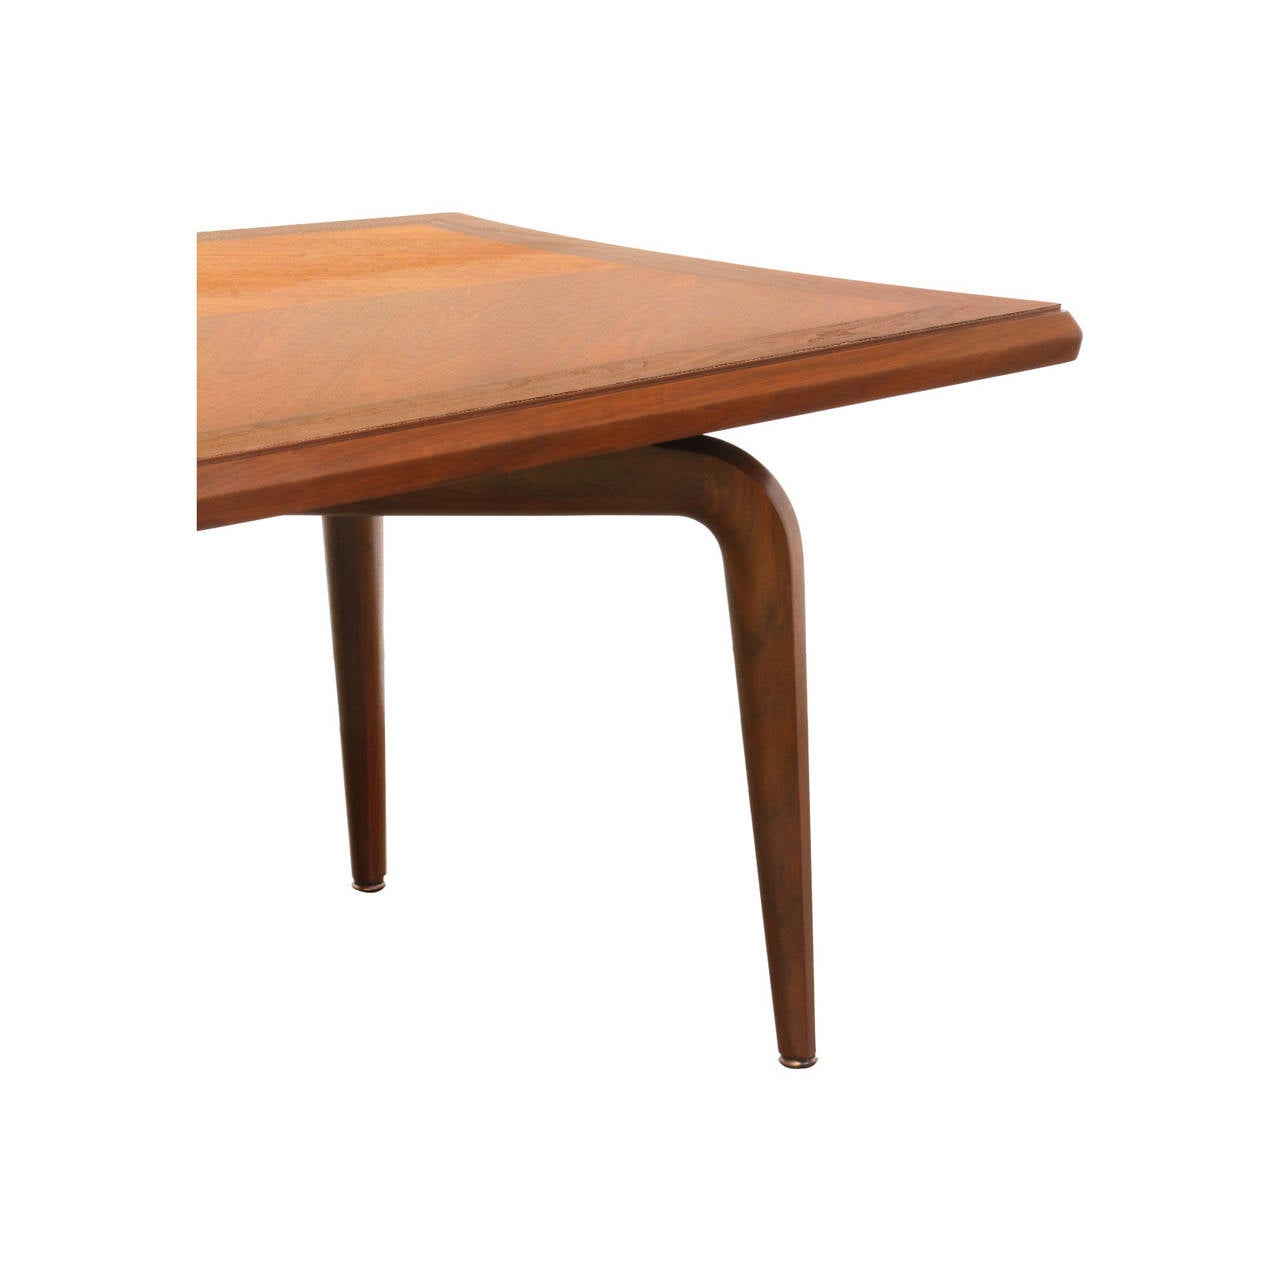 Mid-20th Century Maurice Bailey Monumental Sculptural Dining Table for Monteverdi-Young